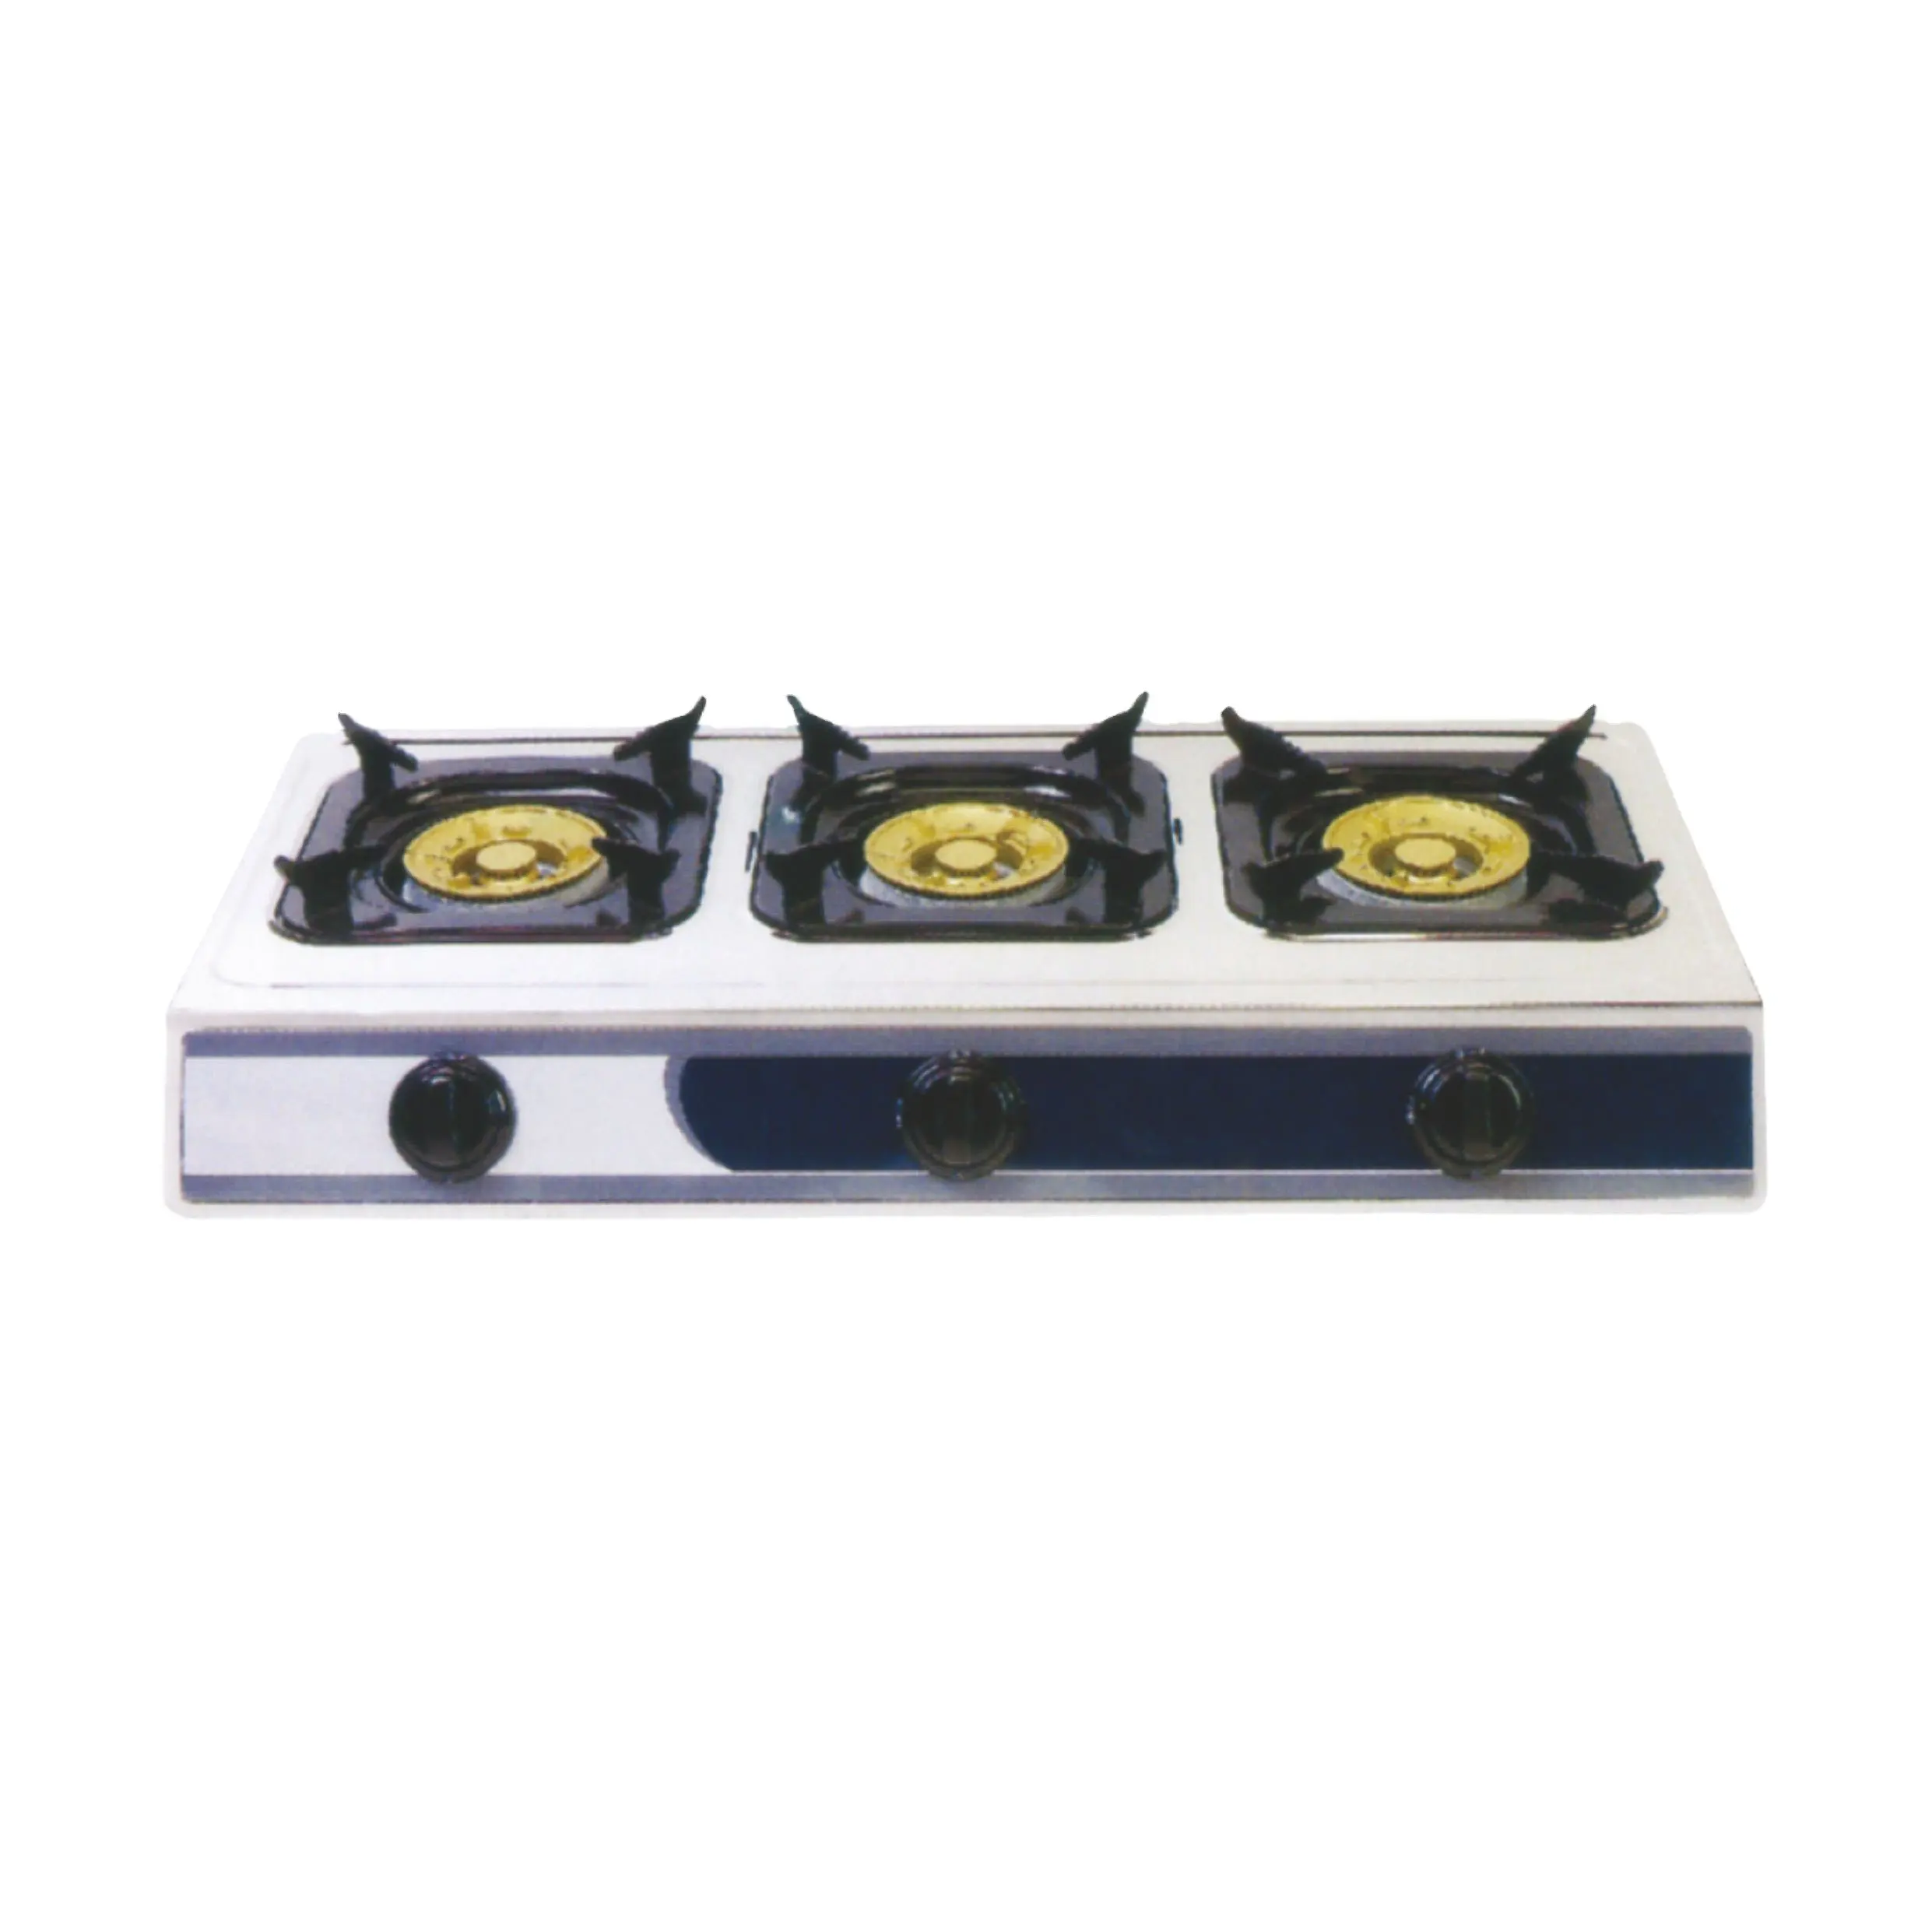 Hot Sale Hydrogen Gas Stove Table Stainless Steel Free Spare Parts Home Electric Gas Stove Gas Cooktops Indian Burner Cap CN;GUA